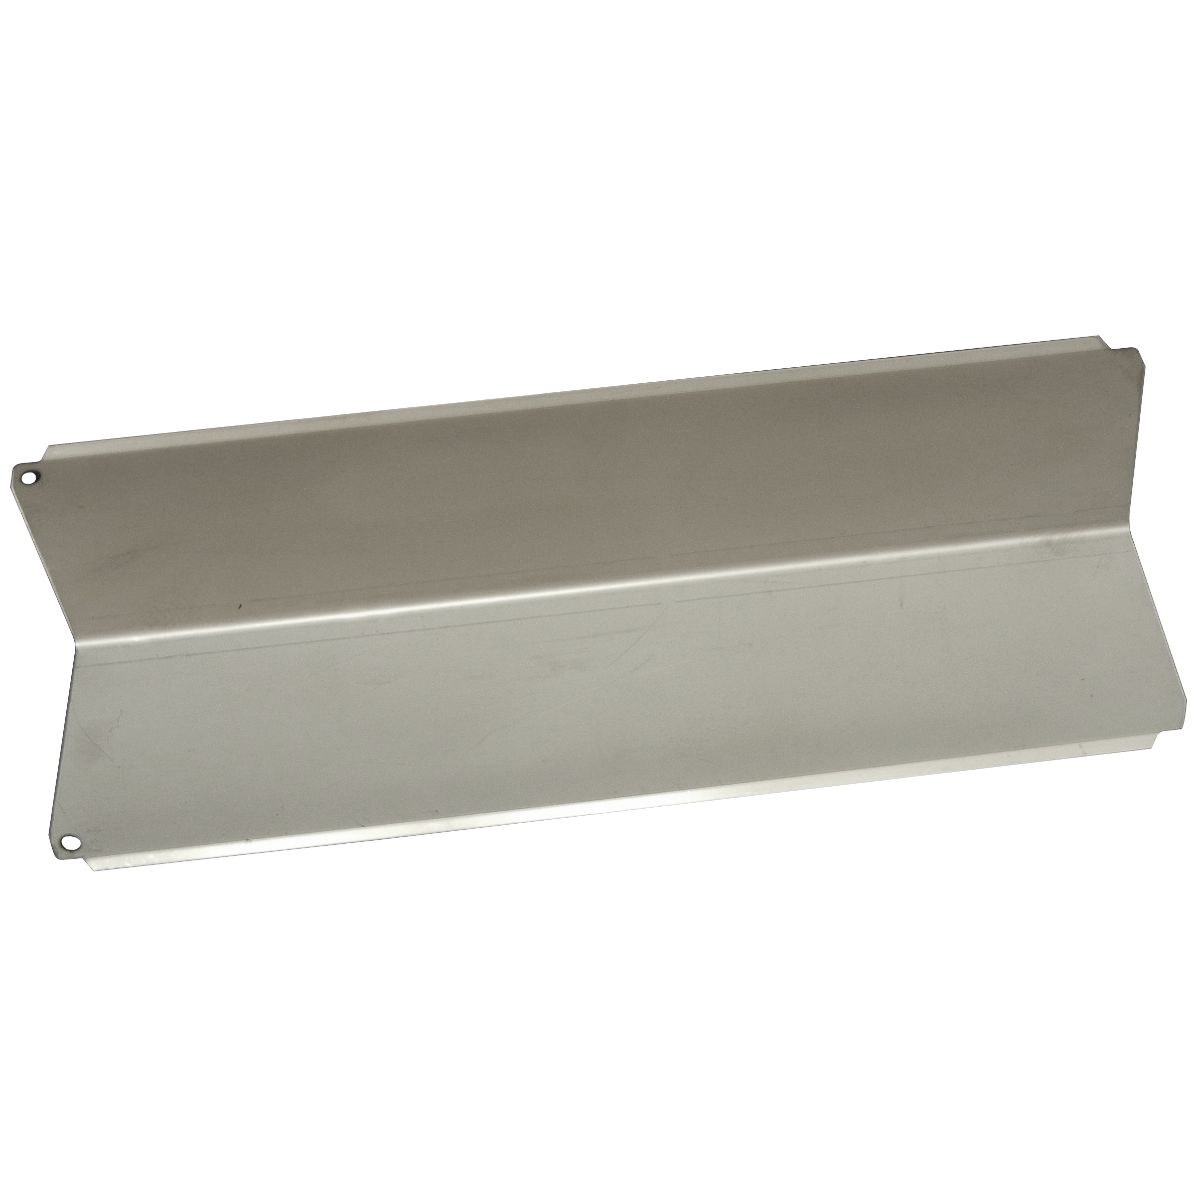 Stainless steel heat plate for Fiesta brand gas grills